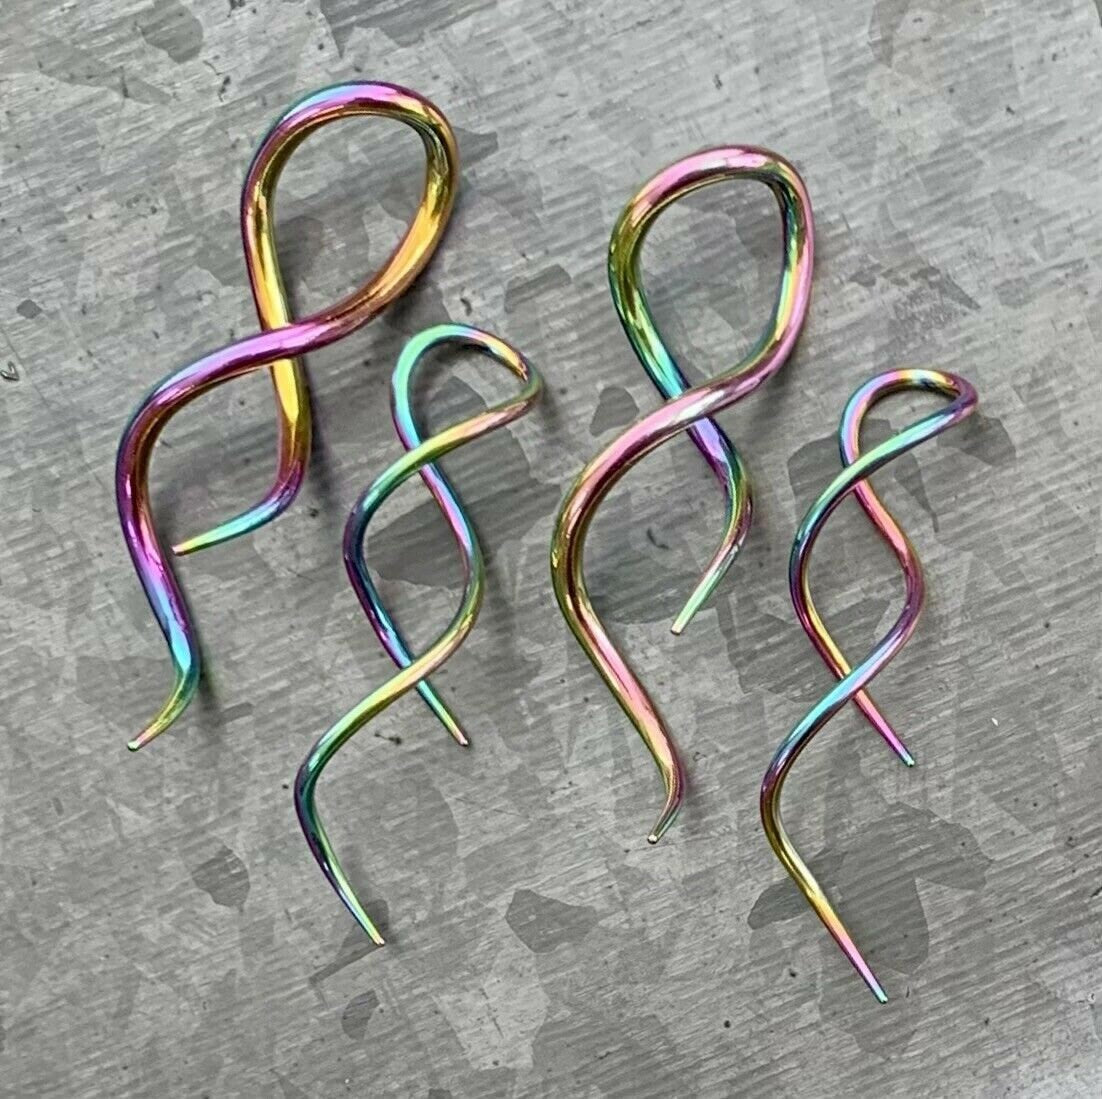 PAIR of Stunning Rainbow Steel Twist Tail Hanging Tapers Expanders / Plugs - Gauges 14g (1.6mm) thru 10g (2.4mm) available!